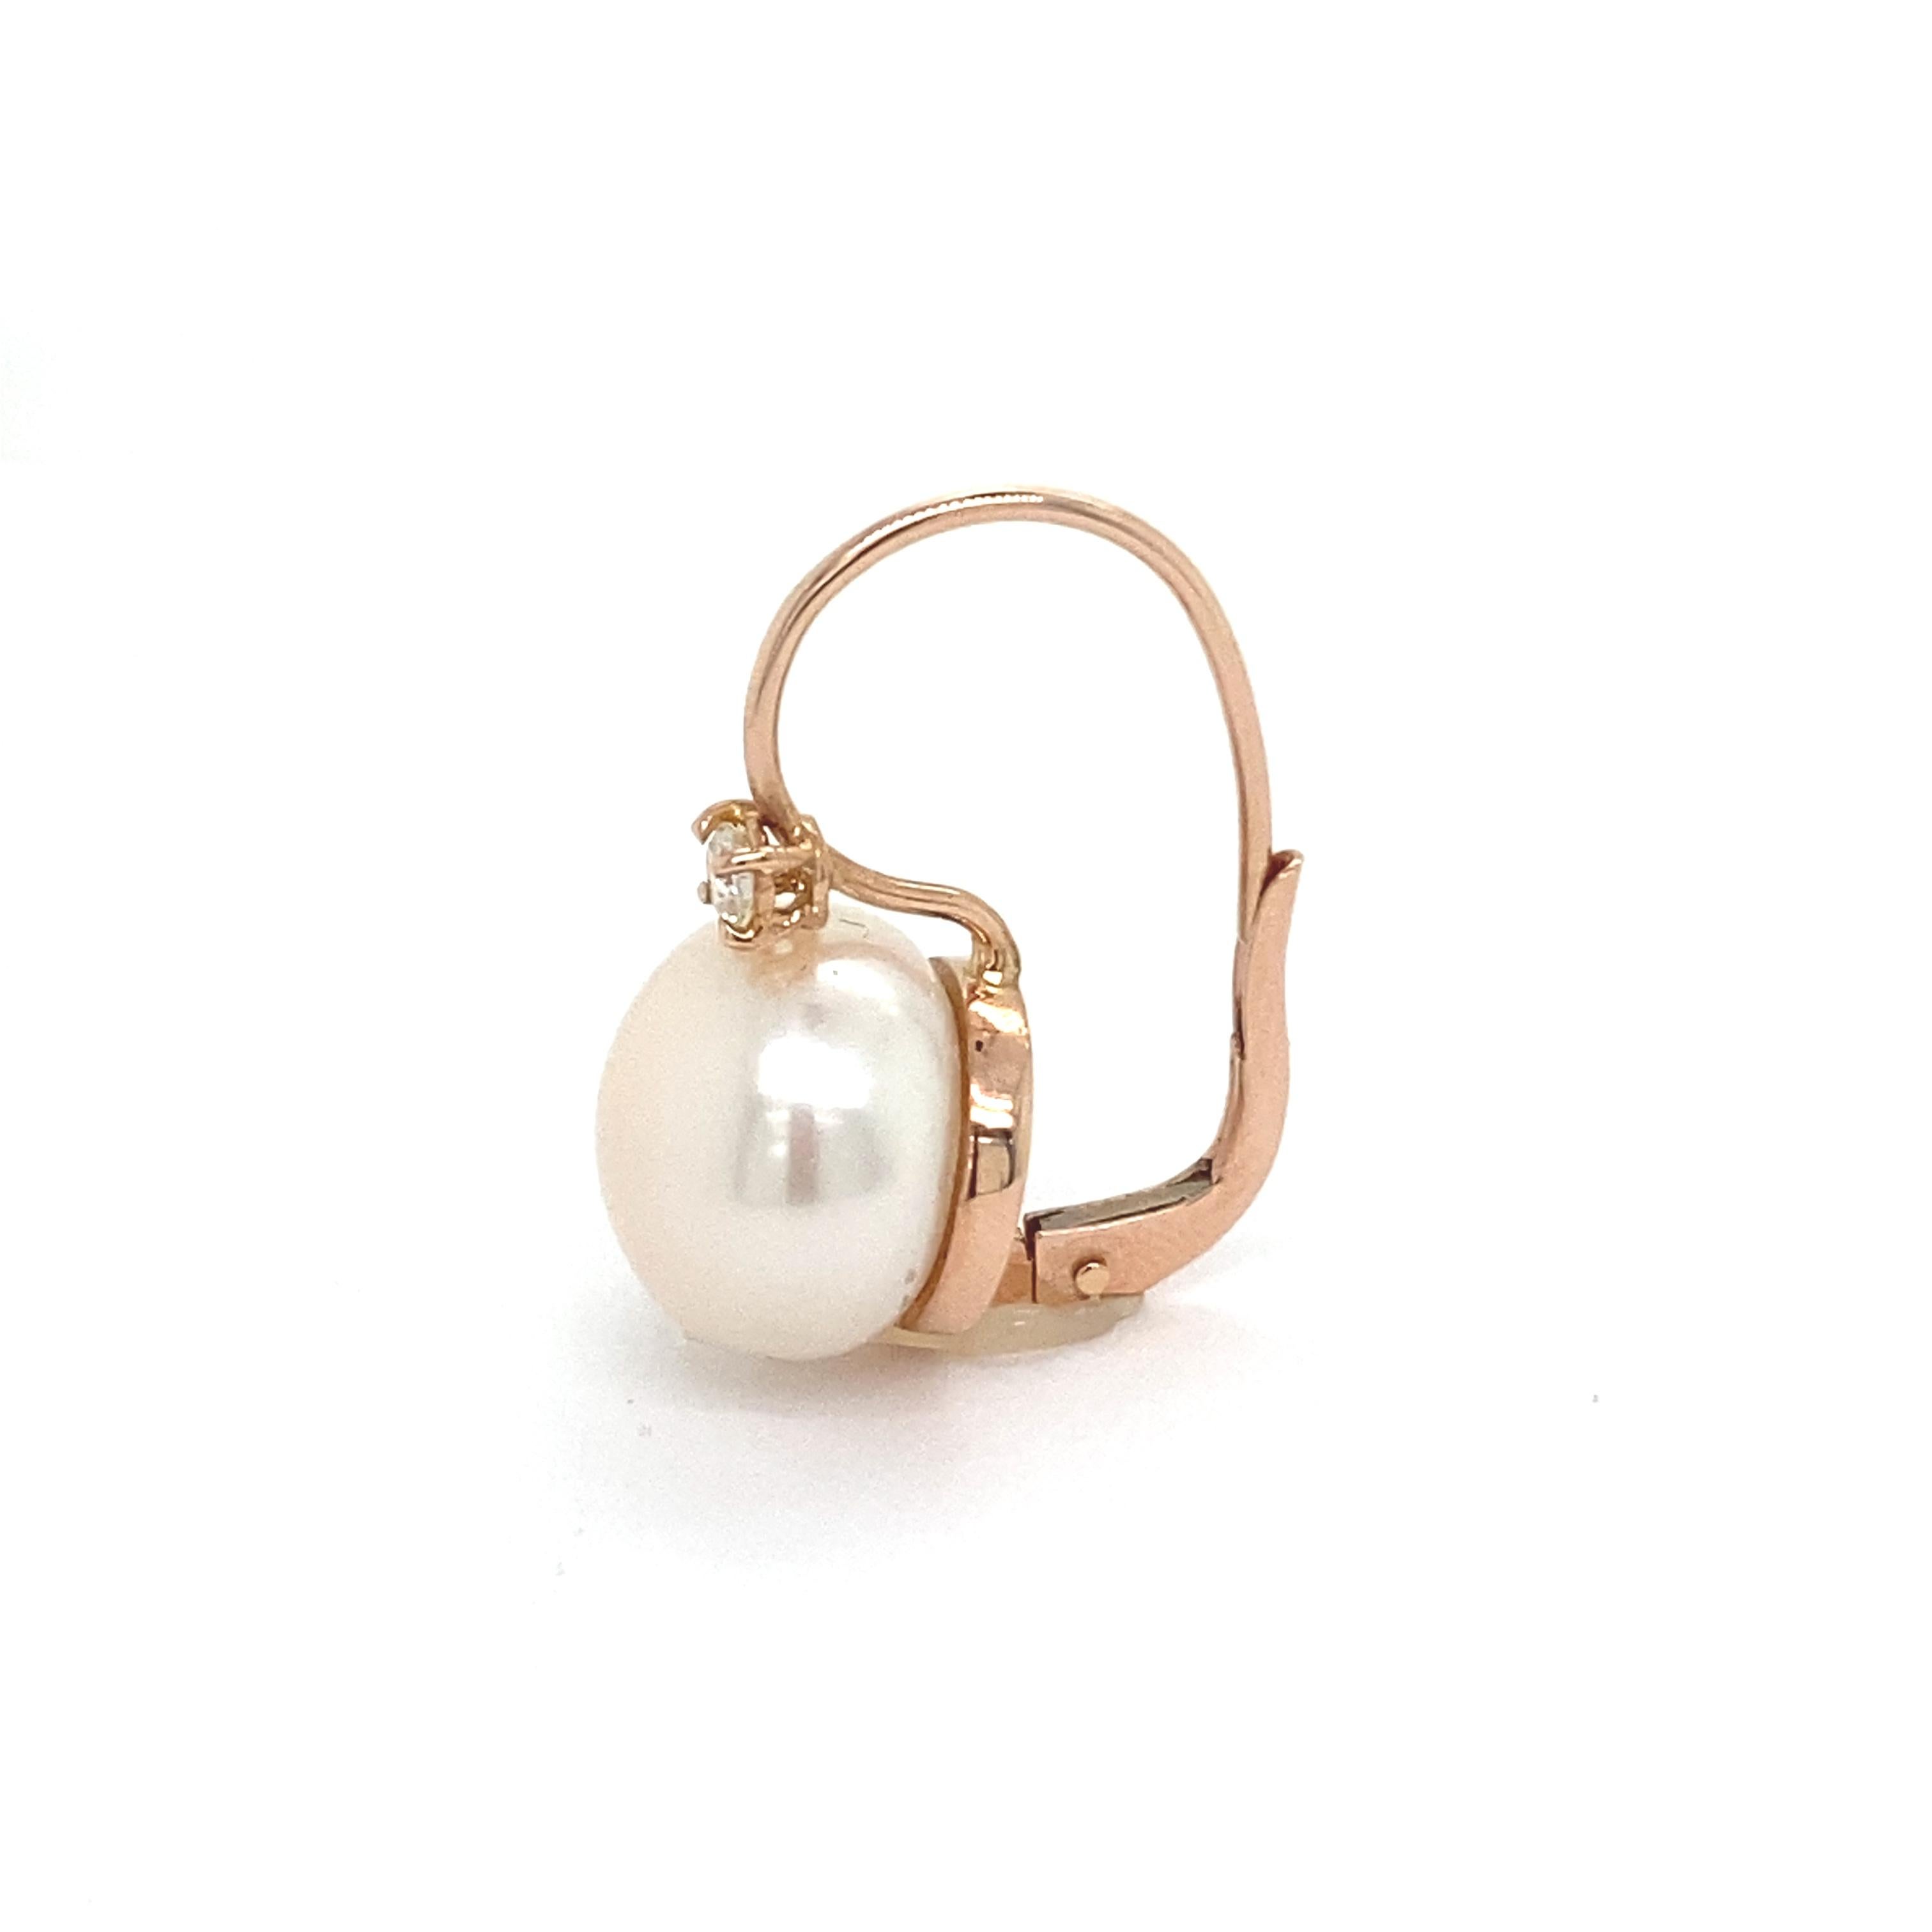 Discover these magnificent earrings in 18-carat pink gold, accompanied by 0.14-carat diamonds and a pearl, a creation of Mesure et Art du Temps. These earrings are both elegant and timeless, combining the beauty of rose gold with the sparkle of